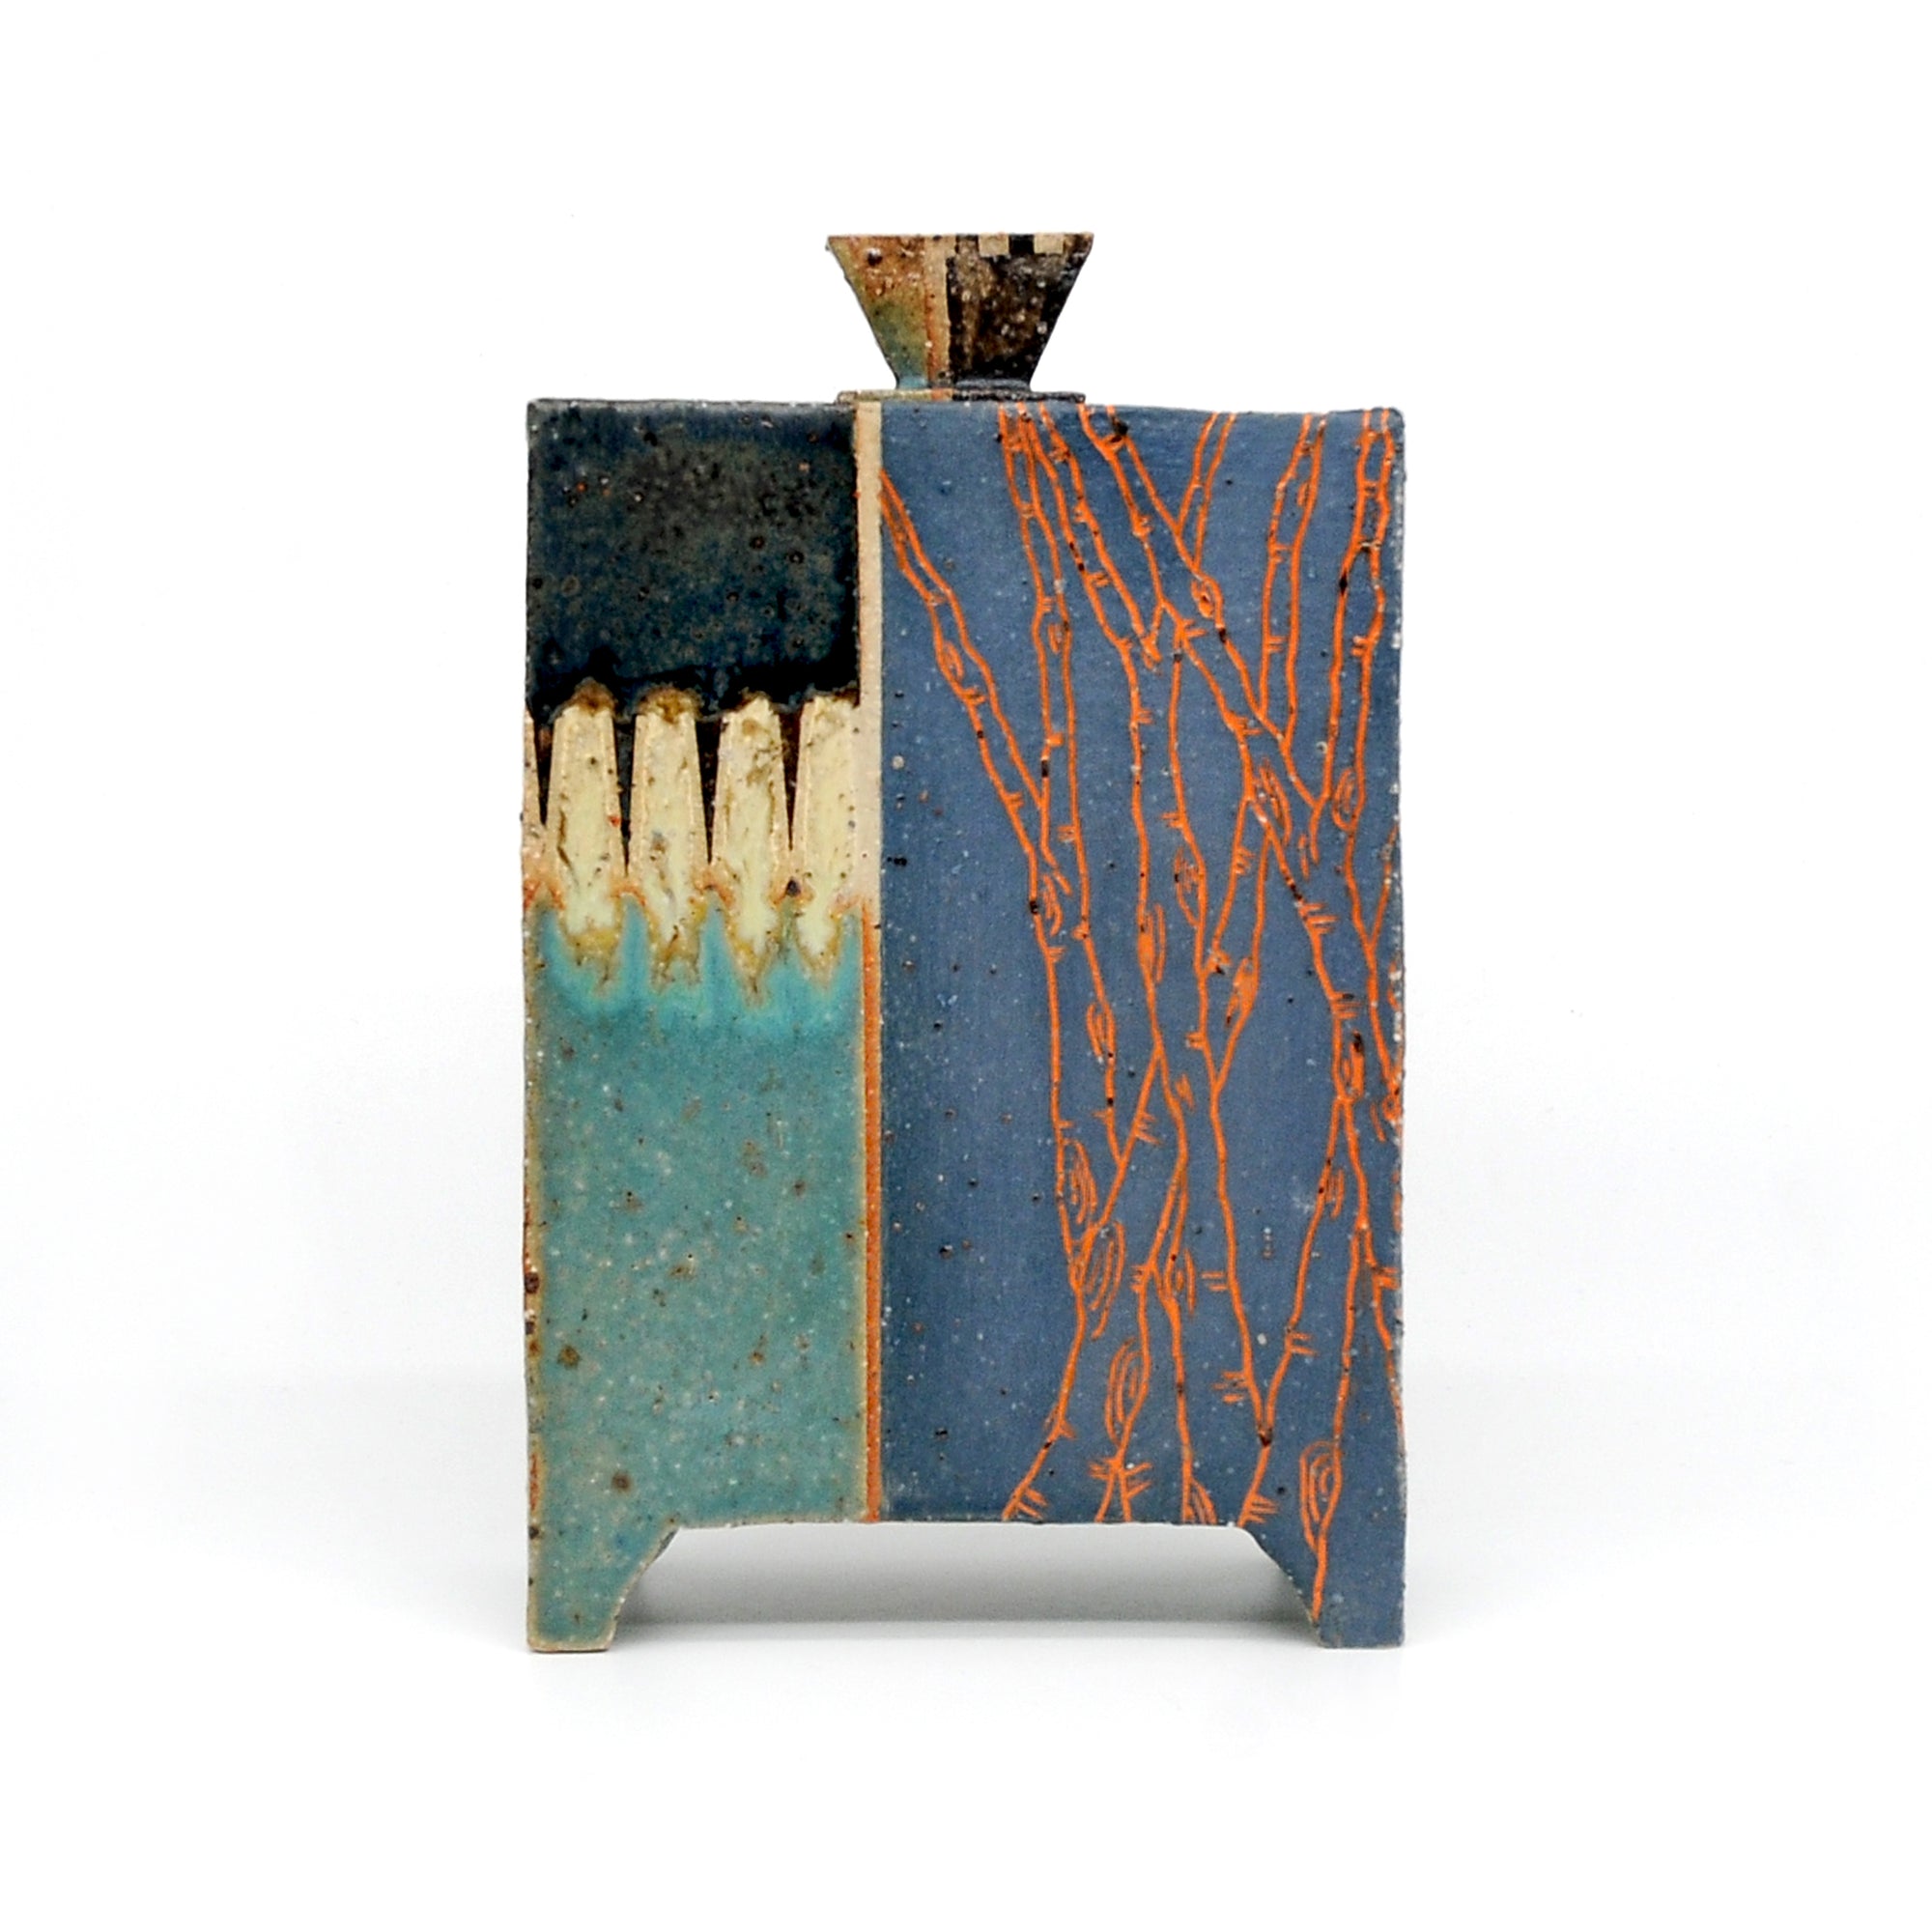 MK24 Rectangular Box by Miae Kim, available at Padstow Gallery, Cornwall